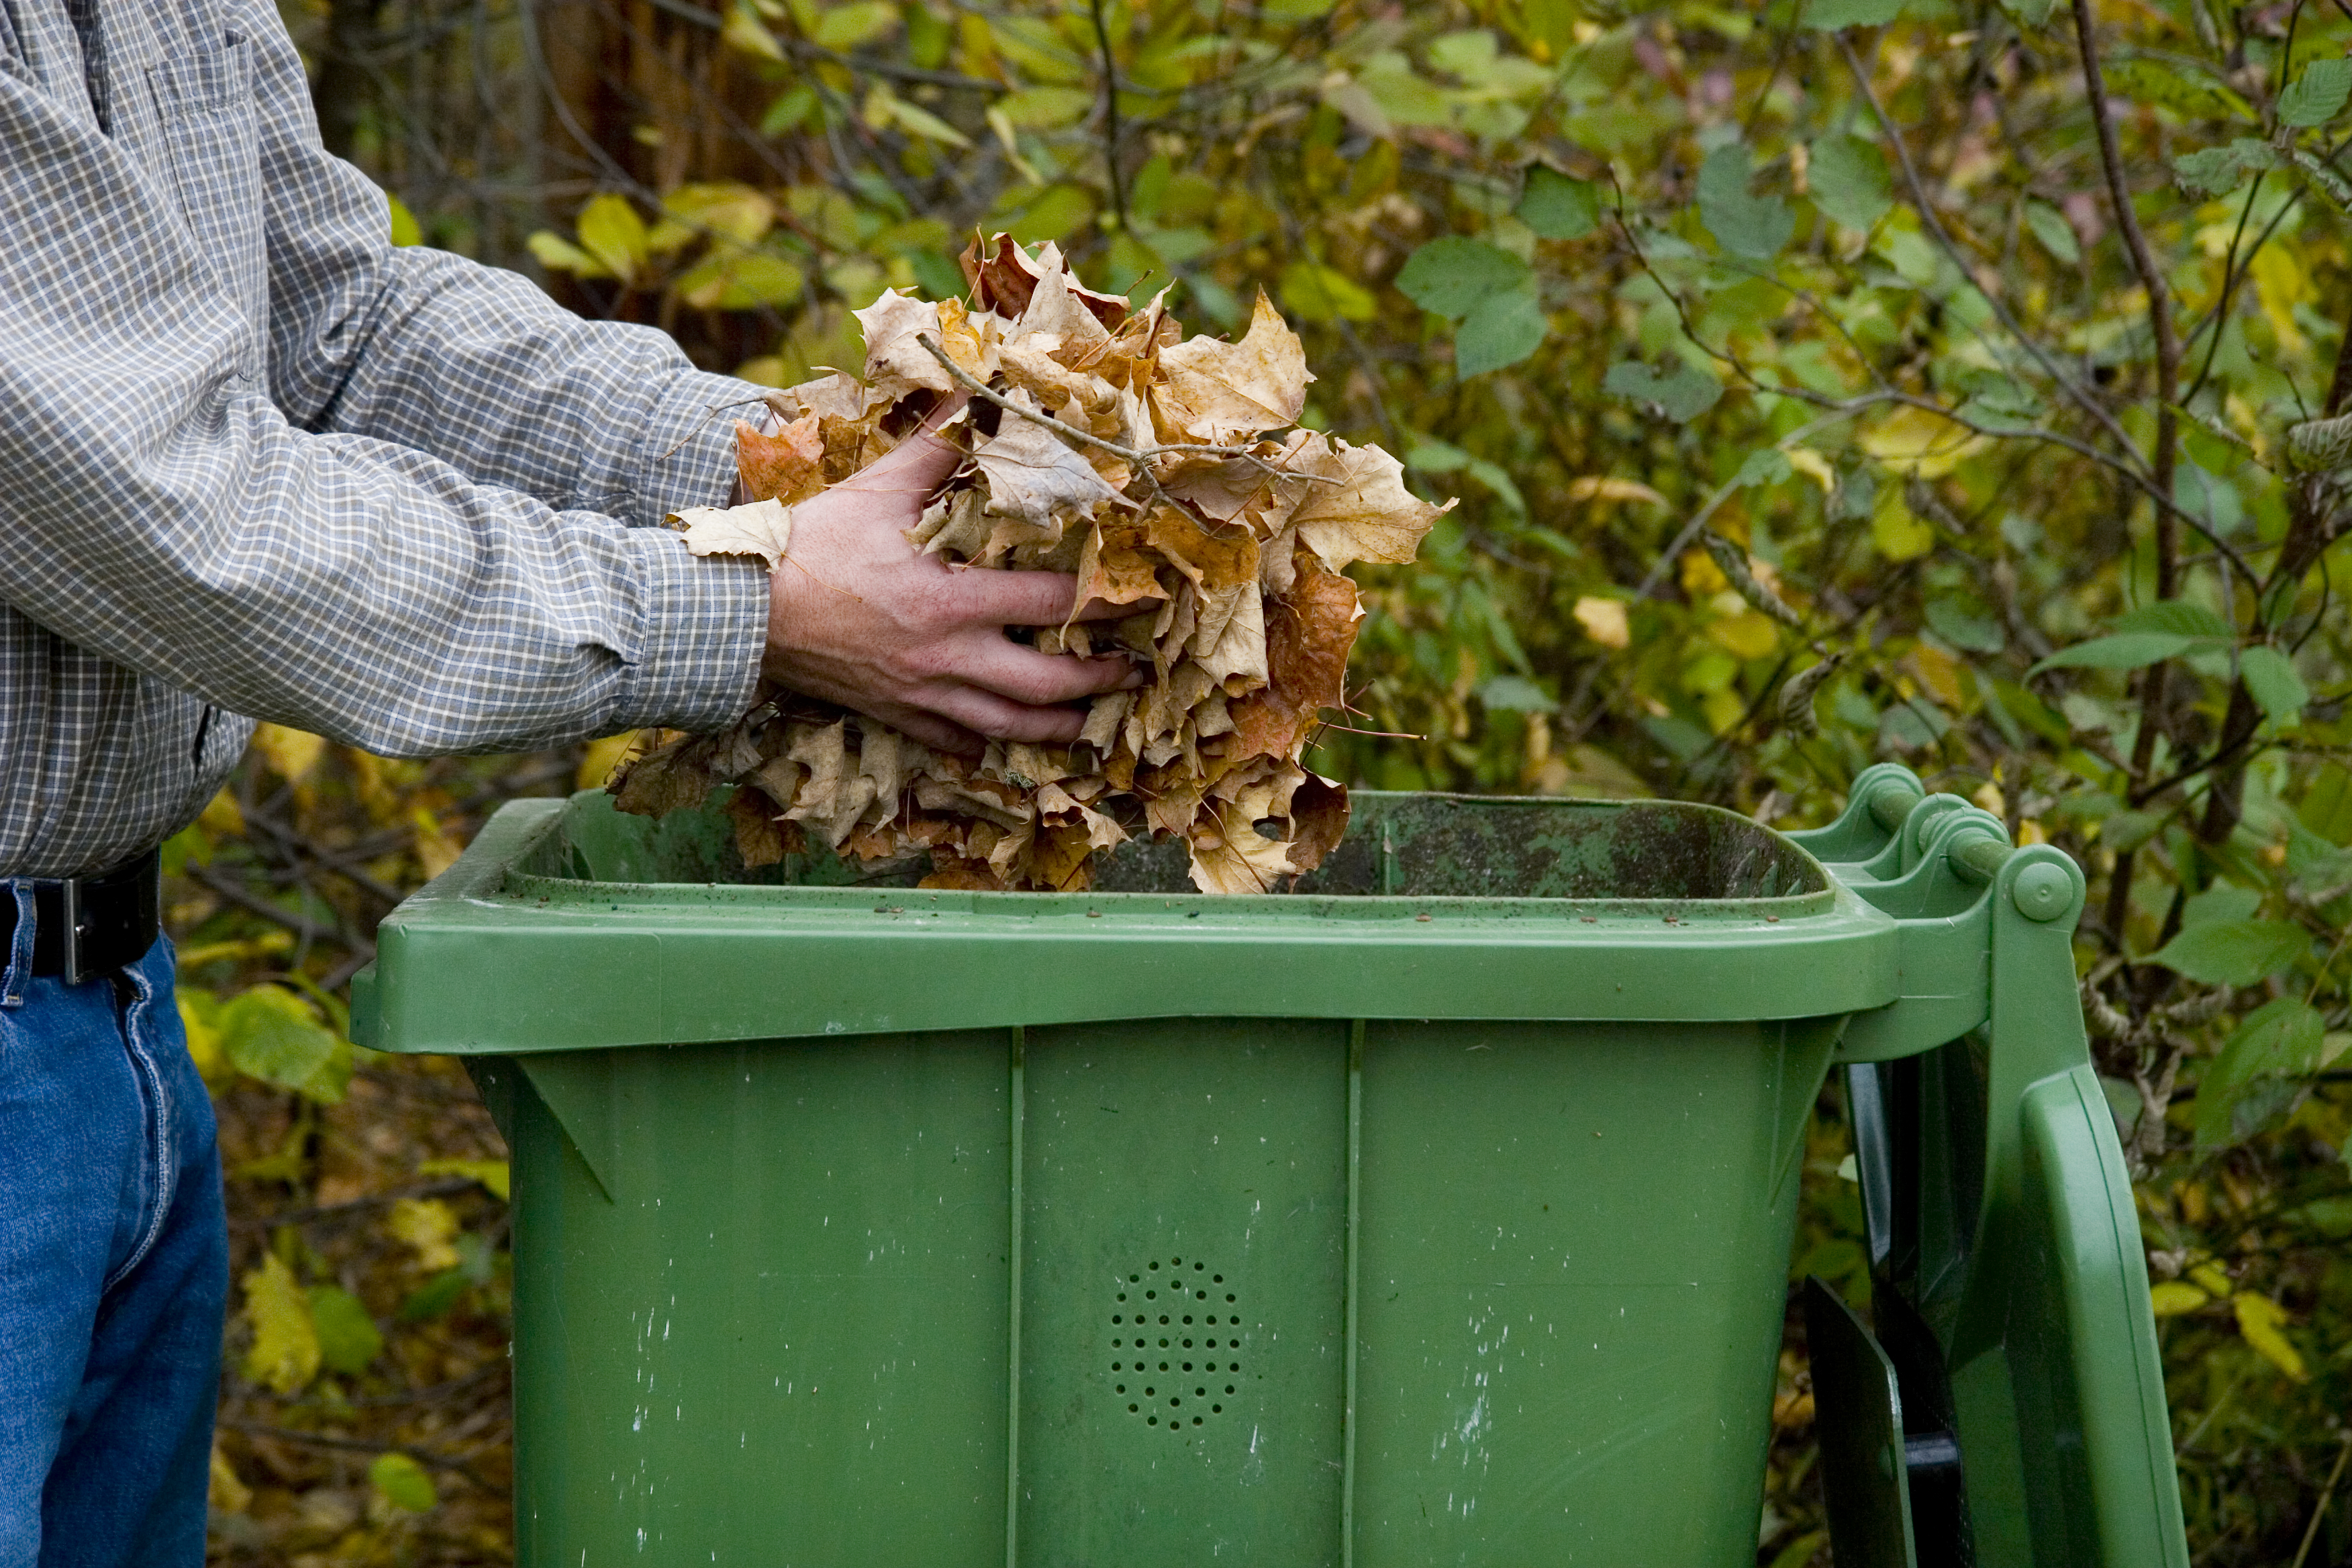 Fall Lawn Care Tips to 'Leaf' No Trace